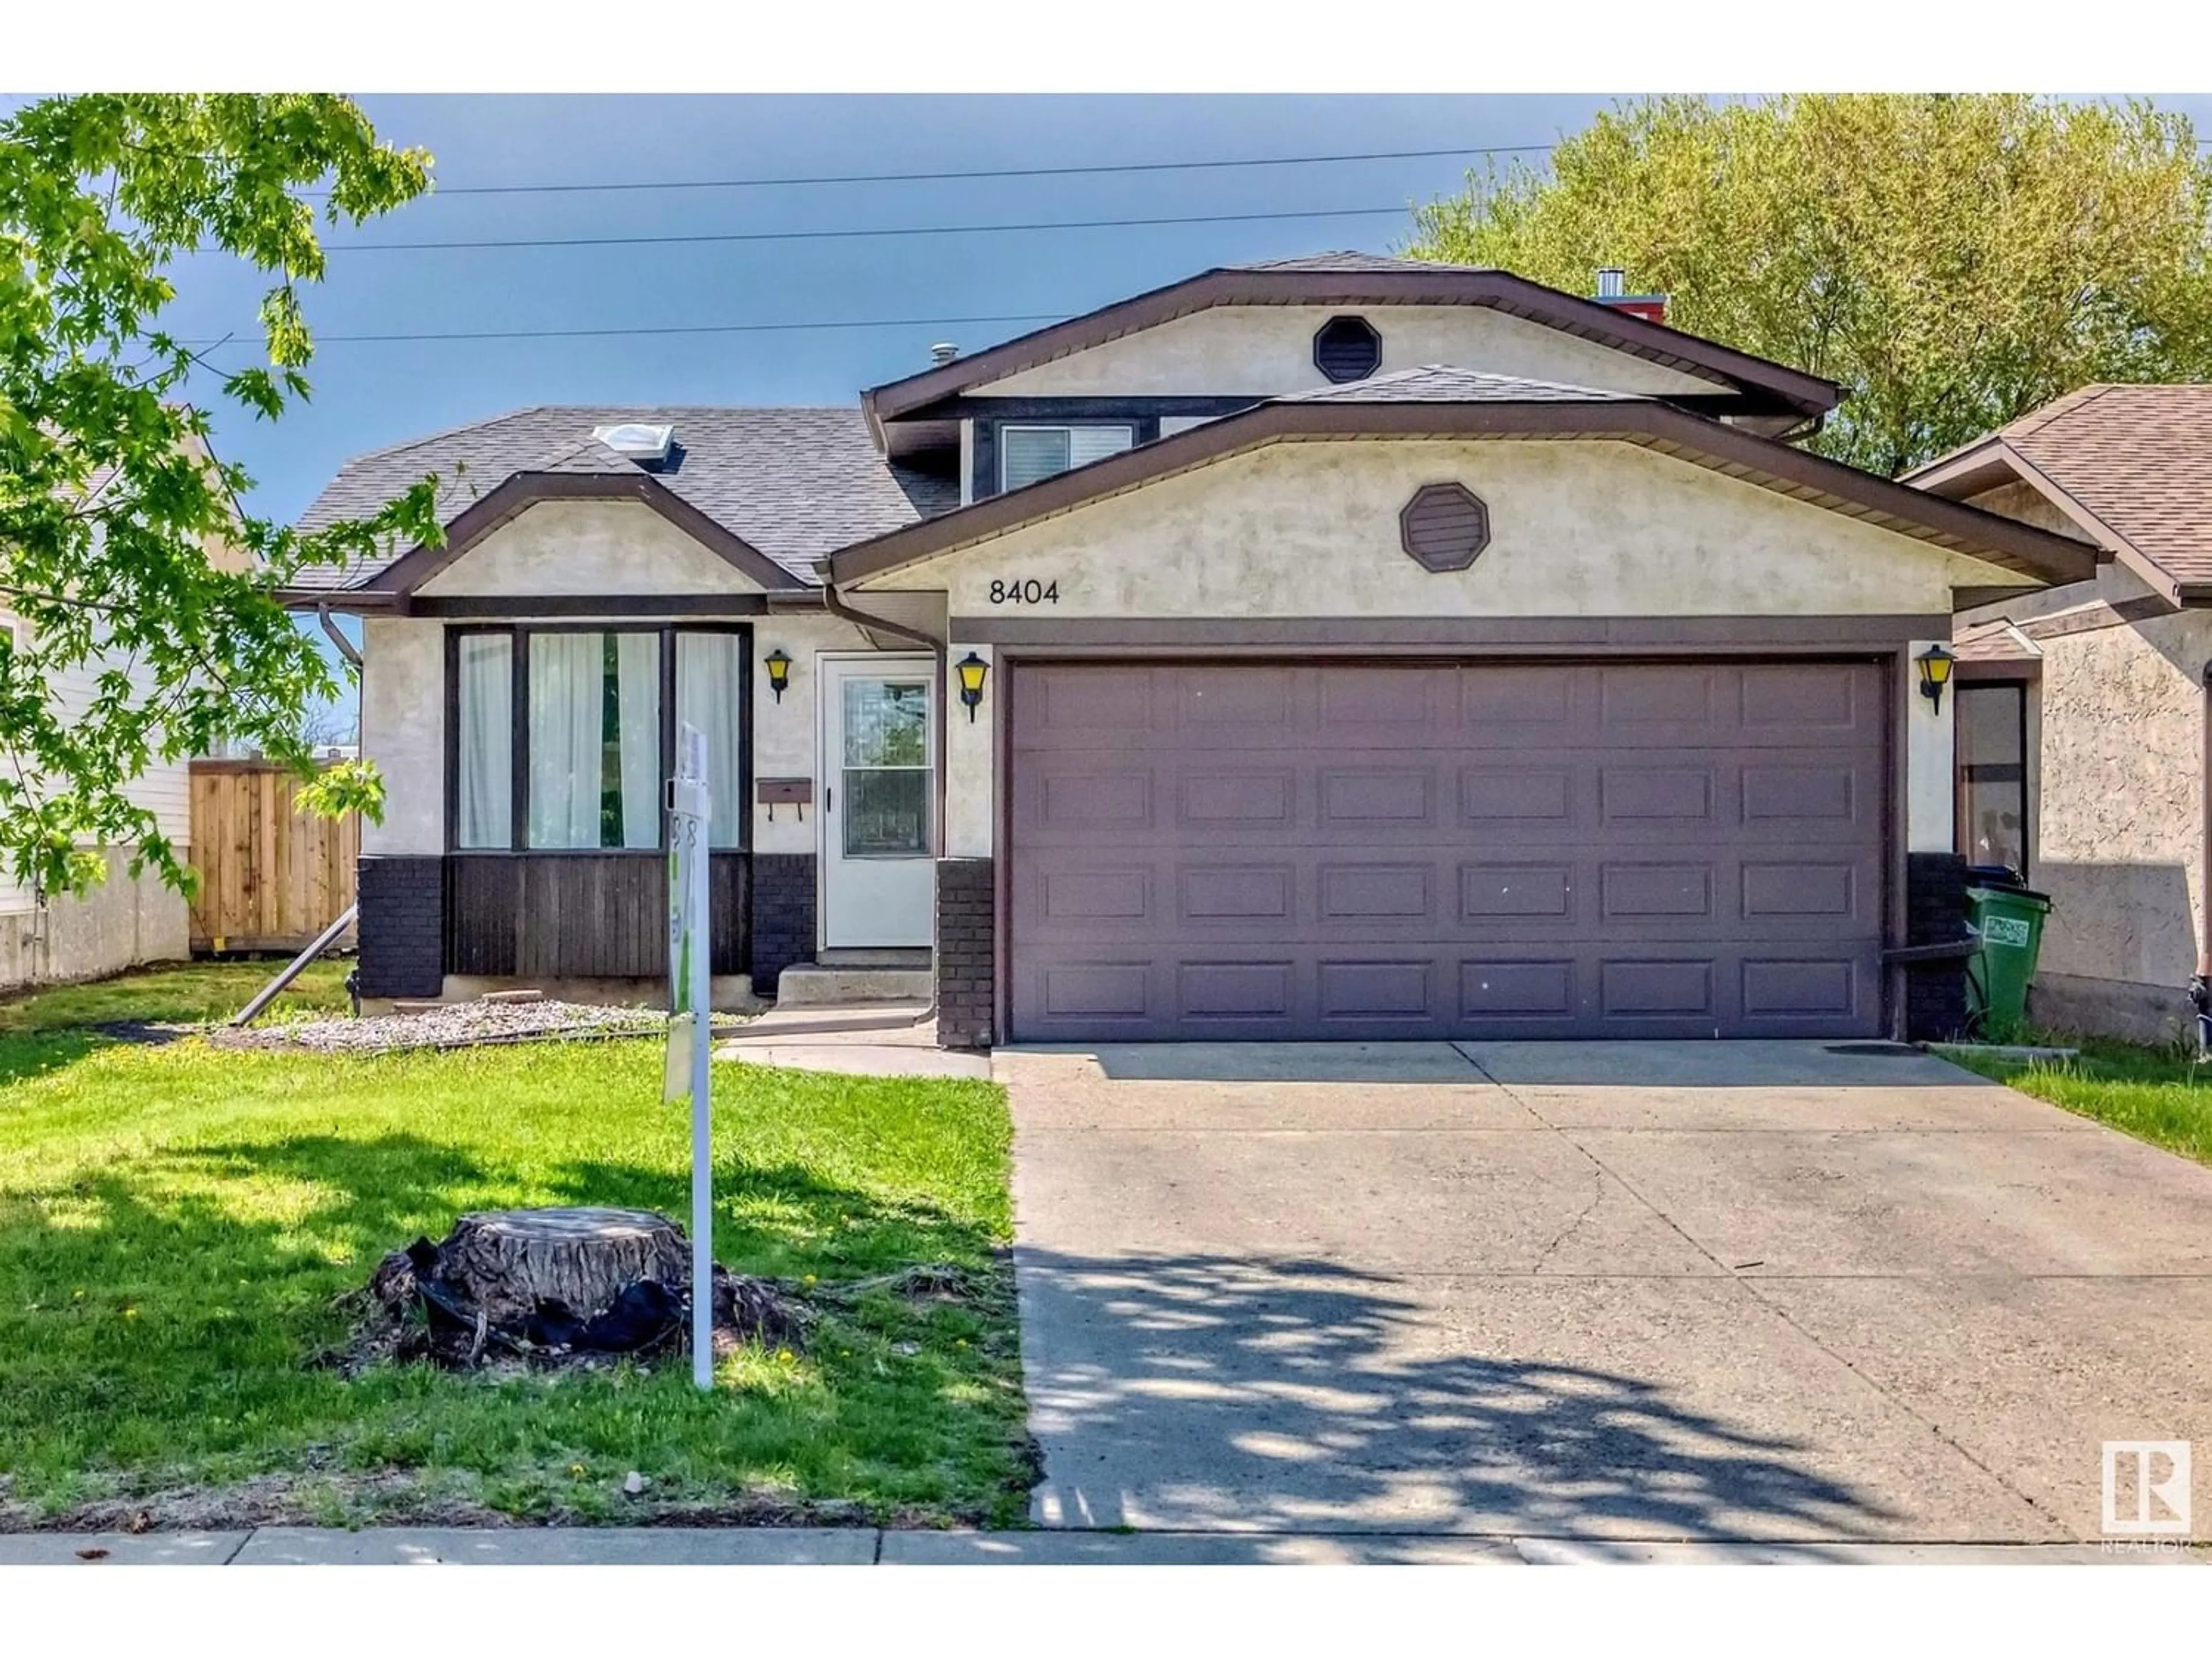 Frontside or backside of a home for 8404 190 ST NW, Edmonton Alberta T5T4Z9